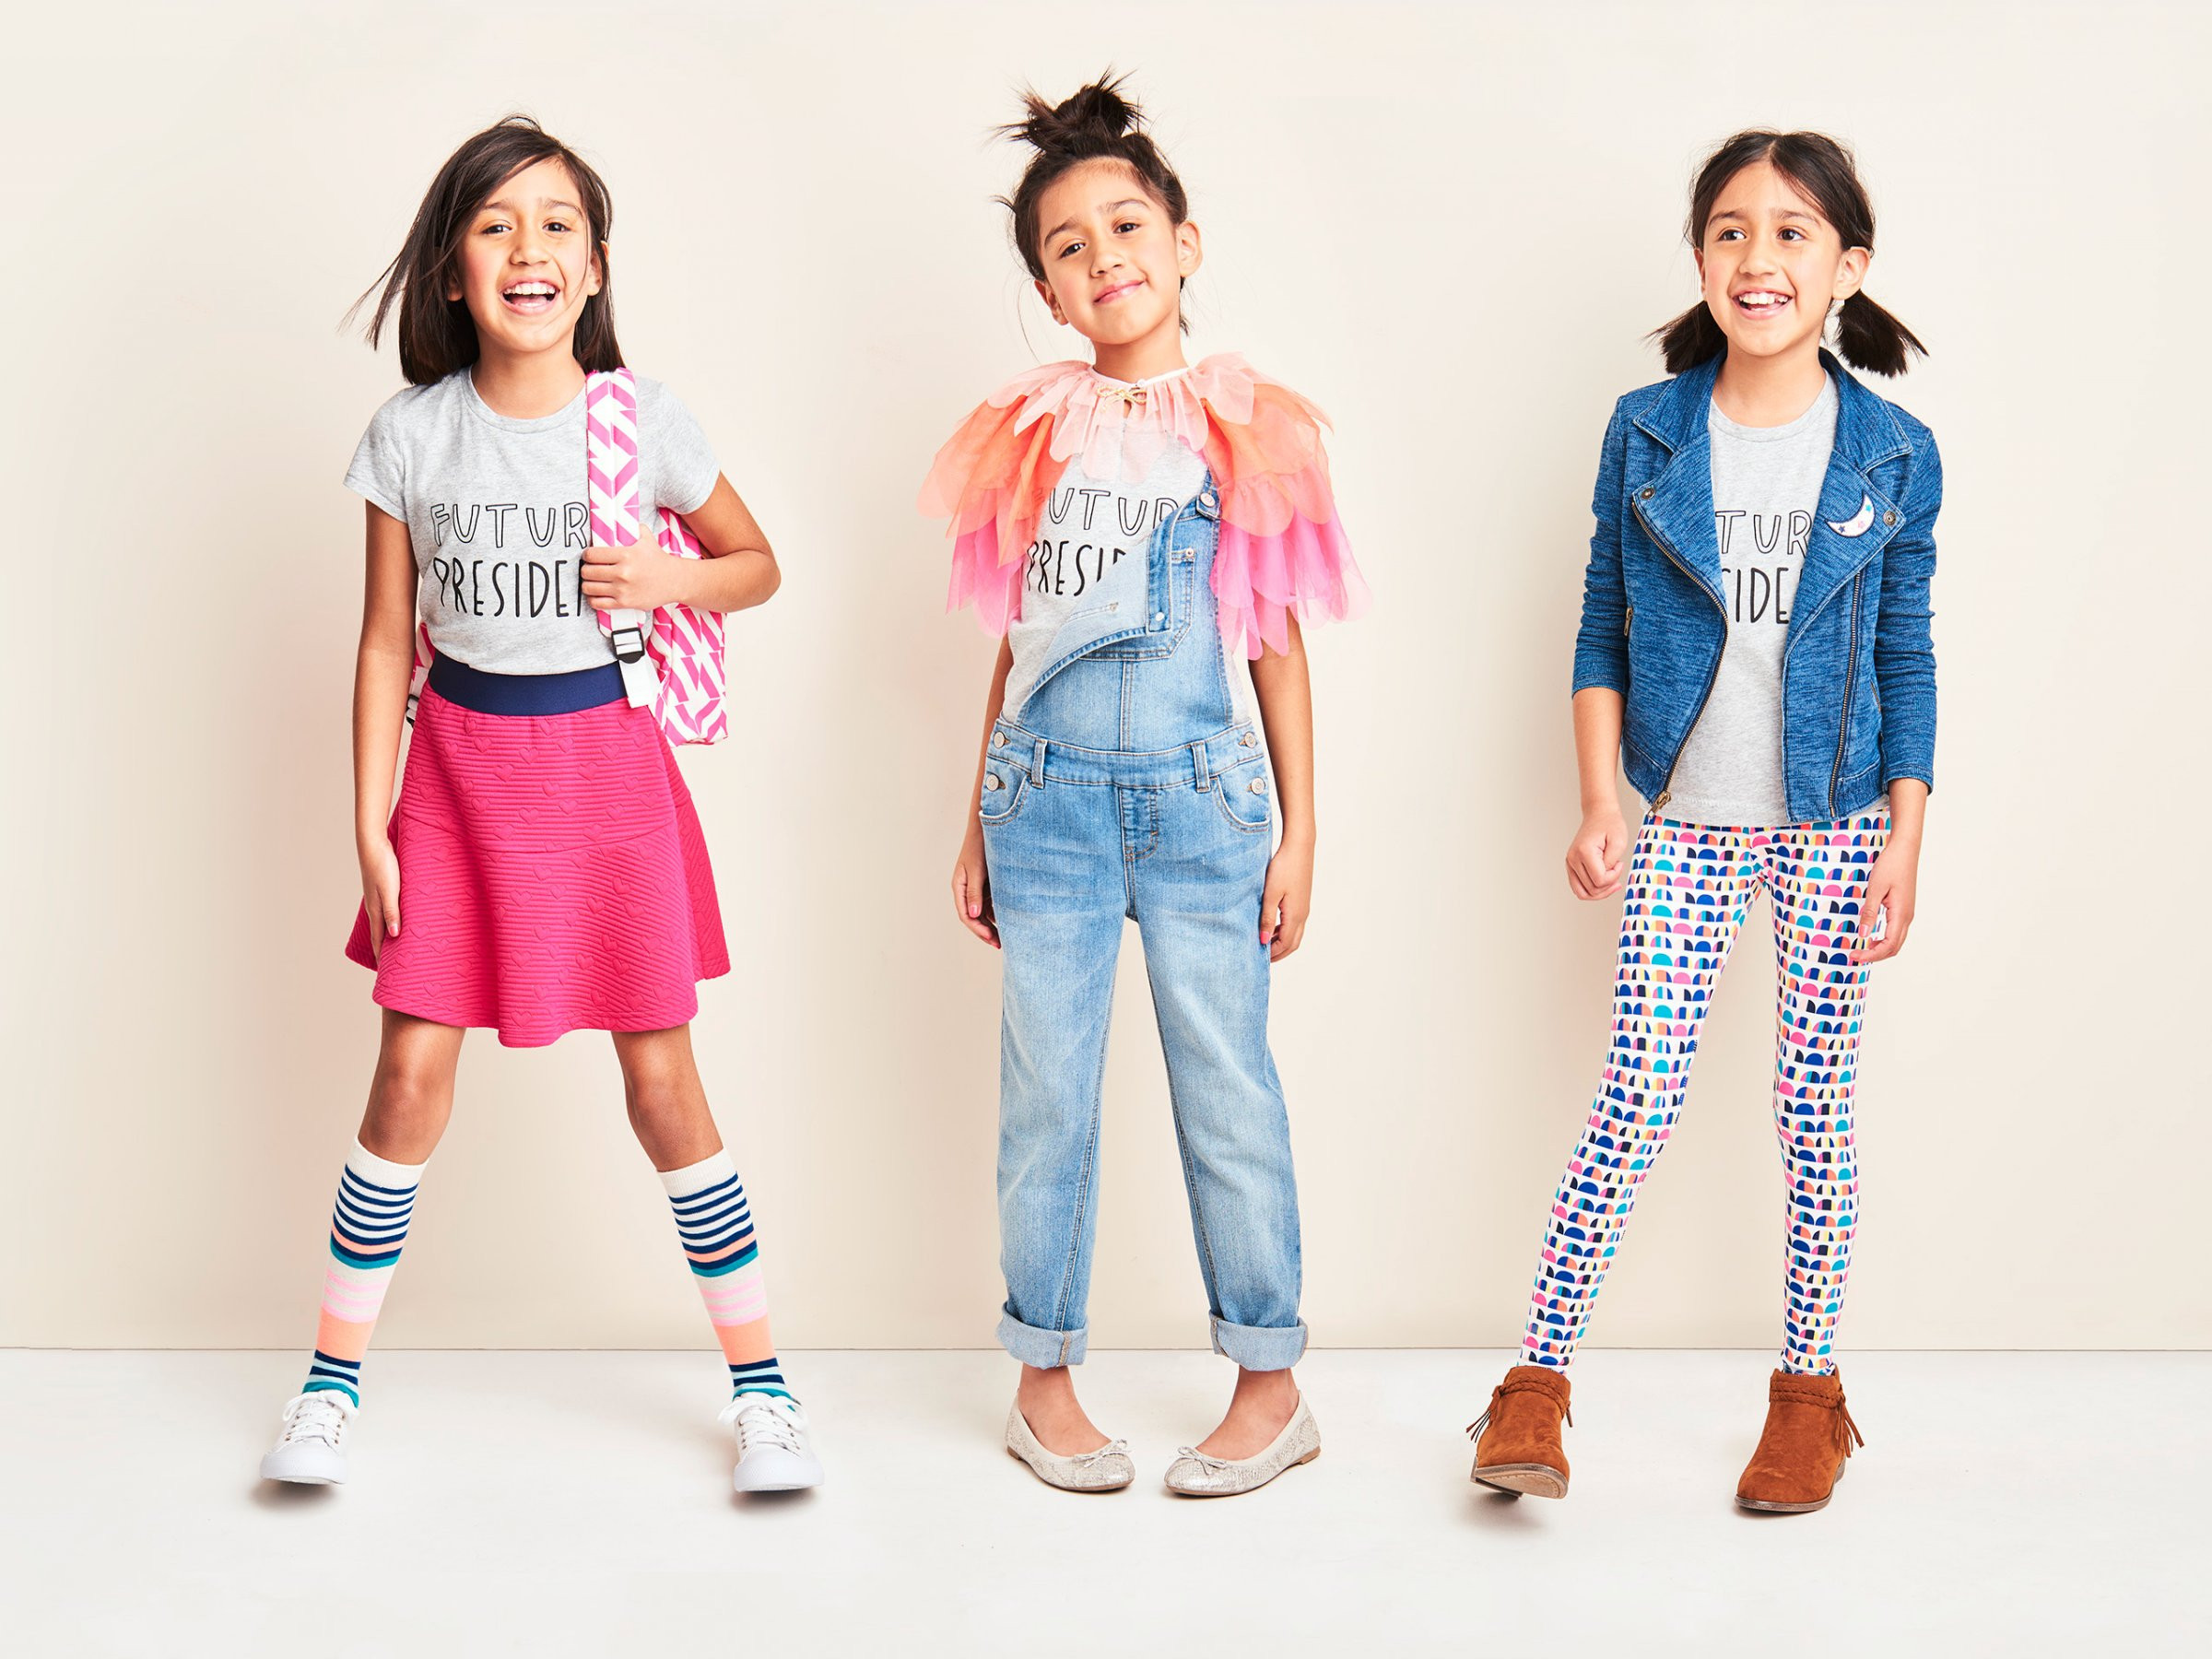 Fashion Kids Clothing
 Today in awesome Tar debuts new kids clothing line